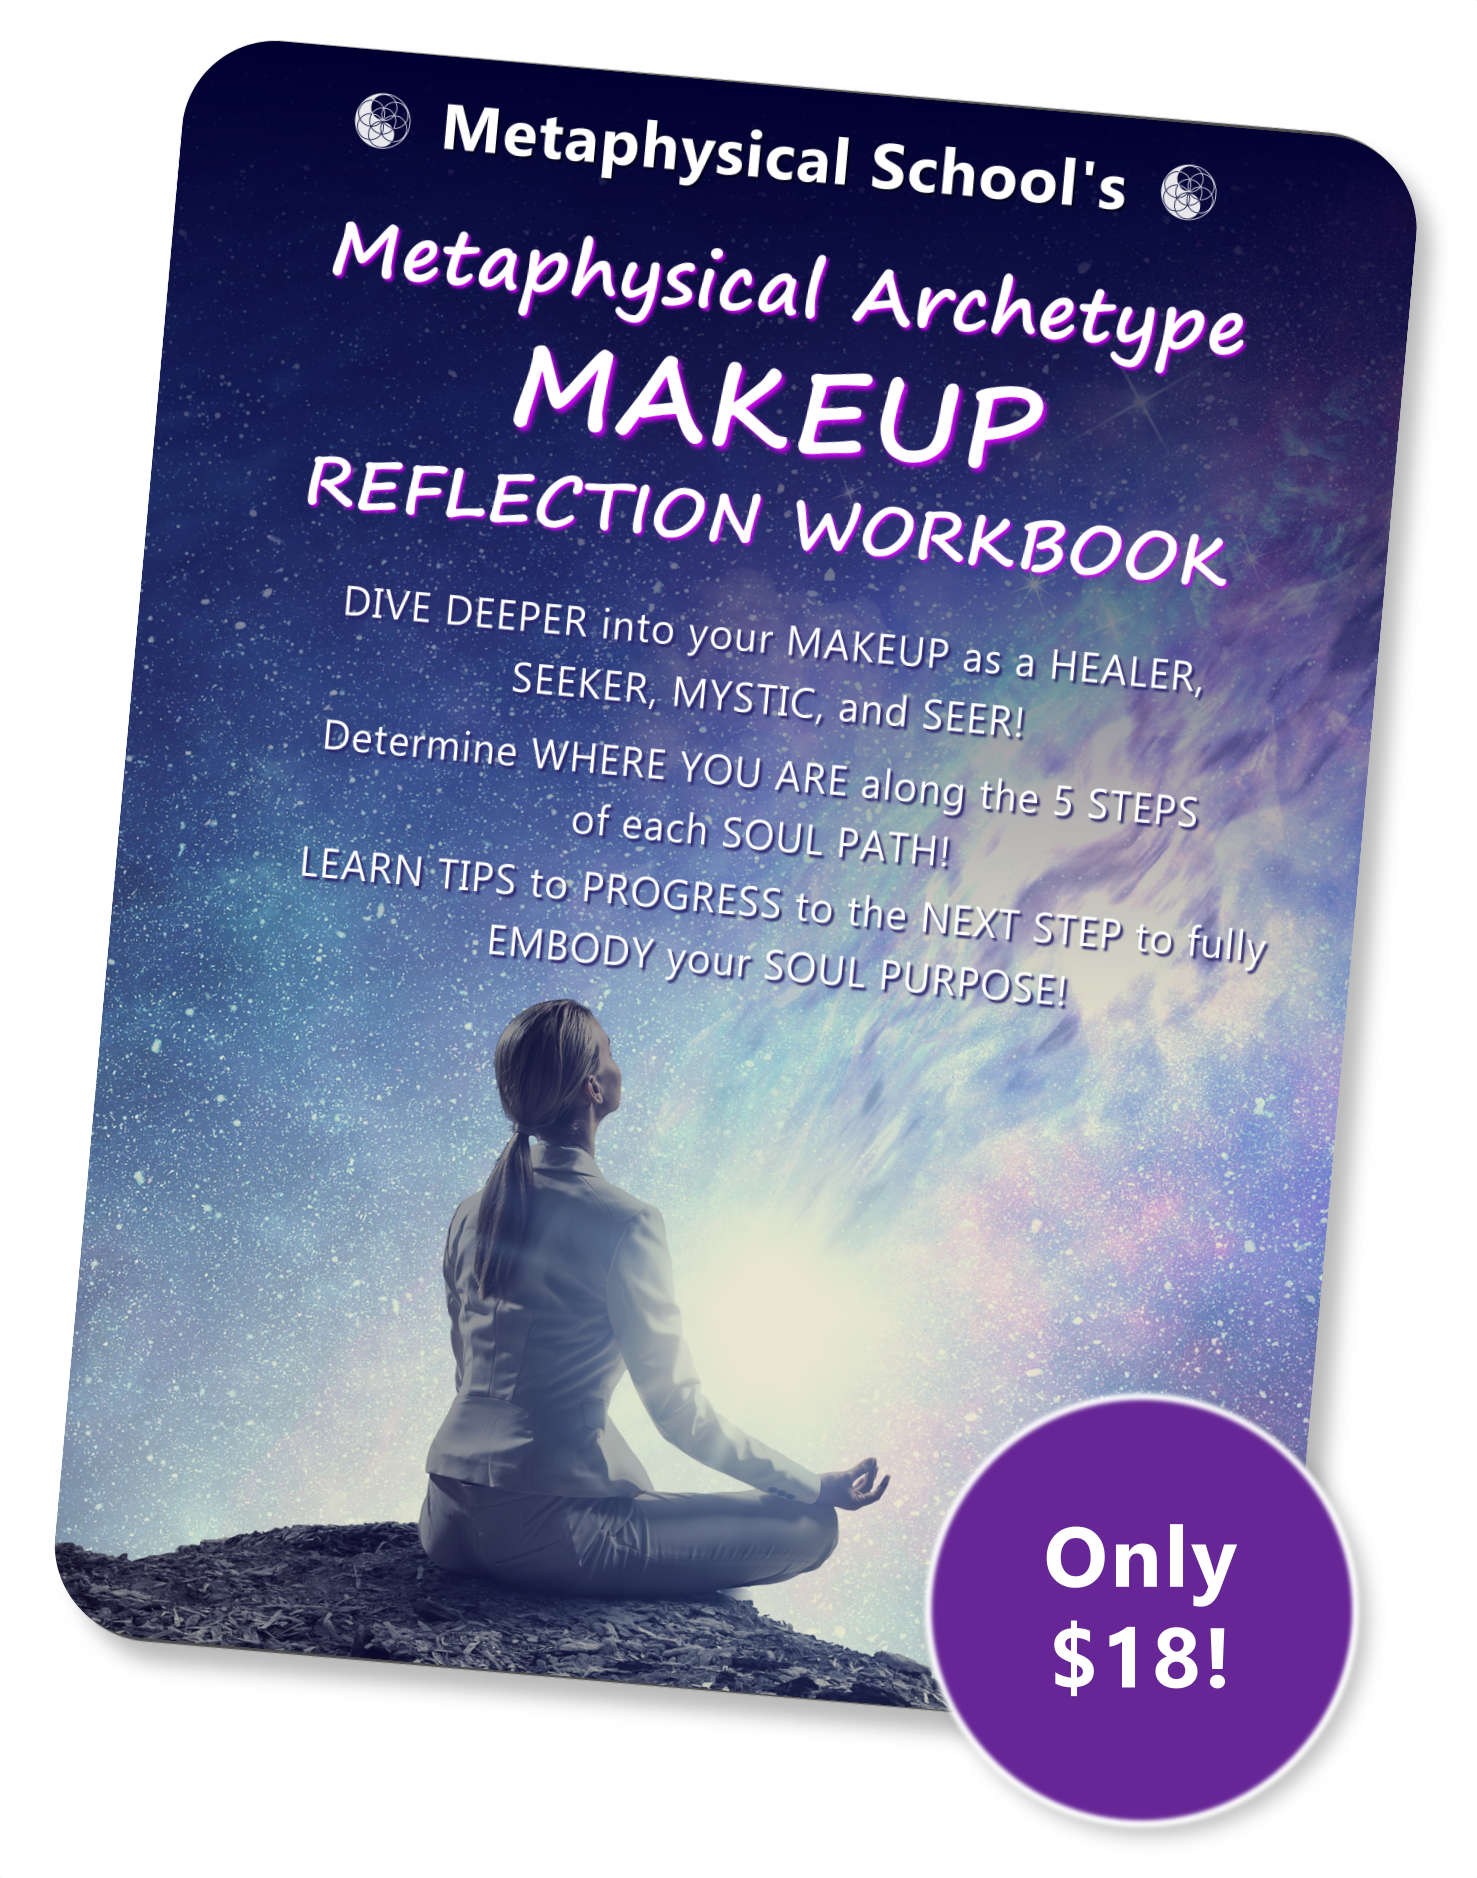 Metaphysical Archetype MAKEUP - REFLECTION WORKBOOK and Price R